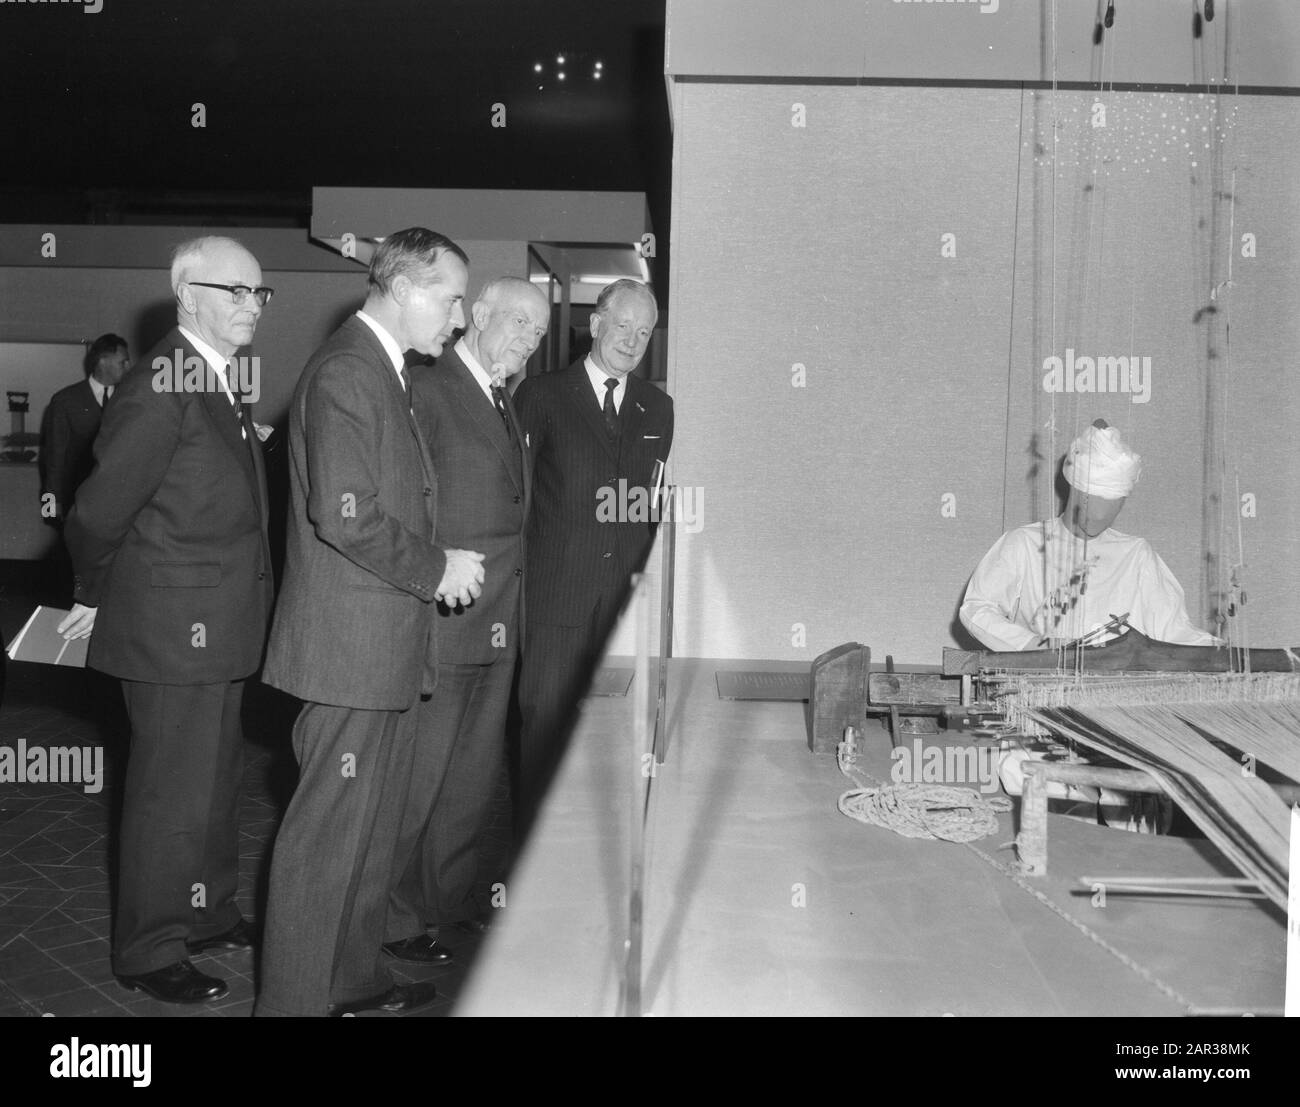 Opening of an exhibition on the Wah, an agricultural community in Pakistan, at the Royal Institute for the Tropics by Alderman Carriage in Amsterdam  Alderman Carriage in the company of a number of men while viewing one of the setups Date: 25 November 1965 Location: Amsterdam, Noord-Holland Keywords: populations, exhibitions, weaving Personal name: Carriage, P.J. Stock Photo